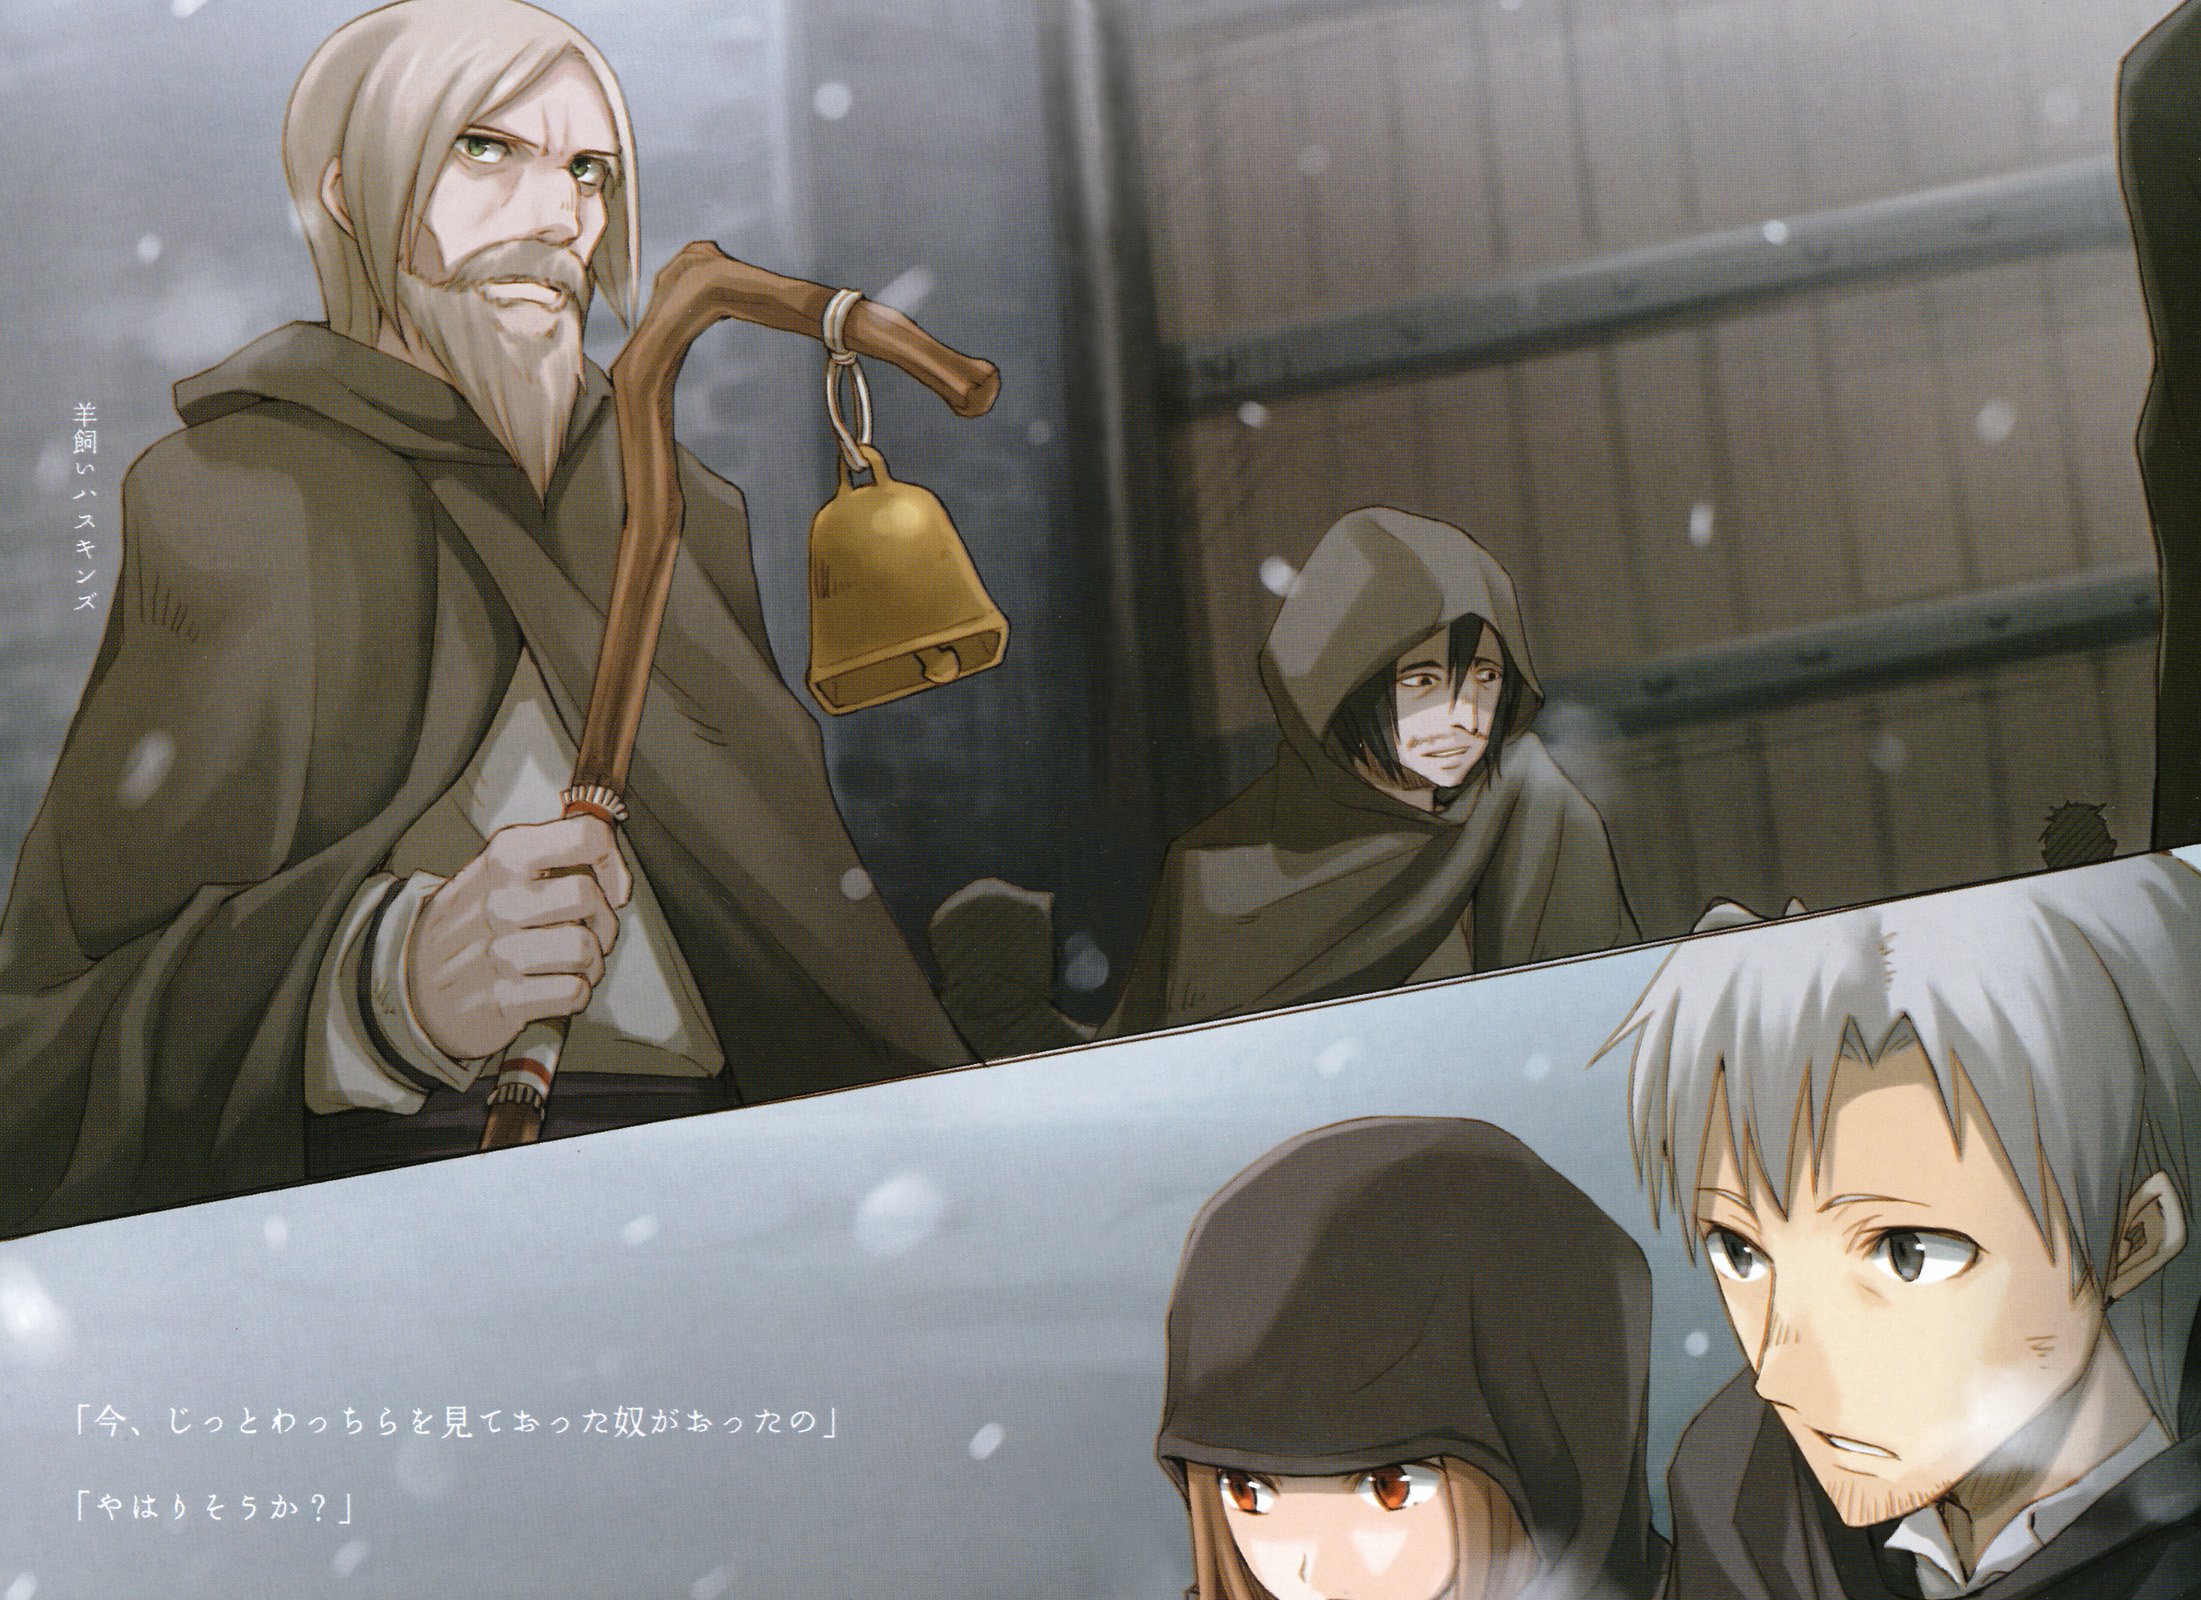 spice and wolf synopsis